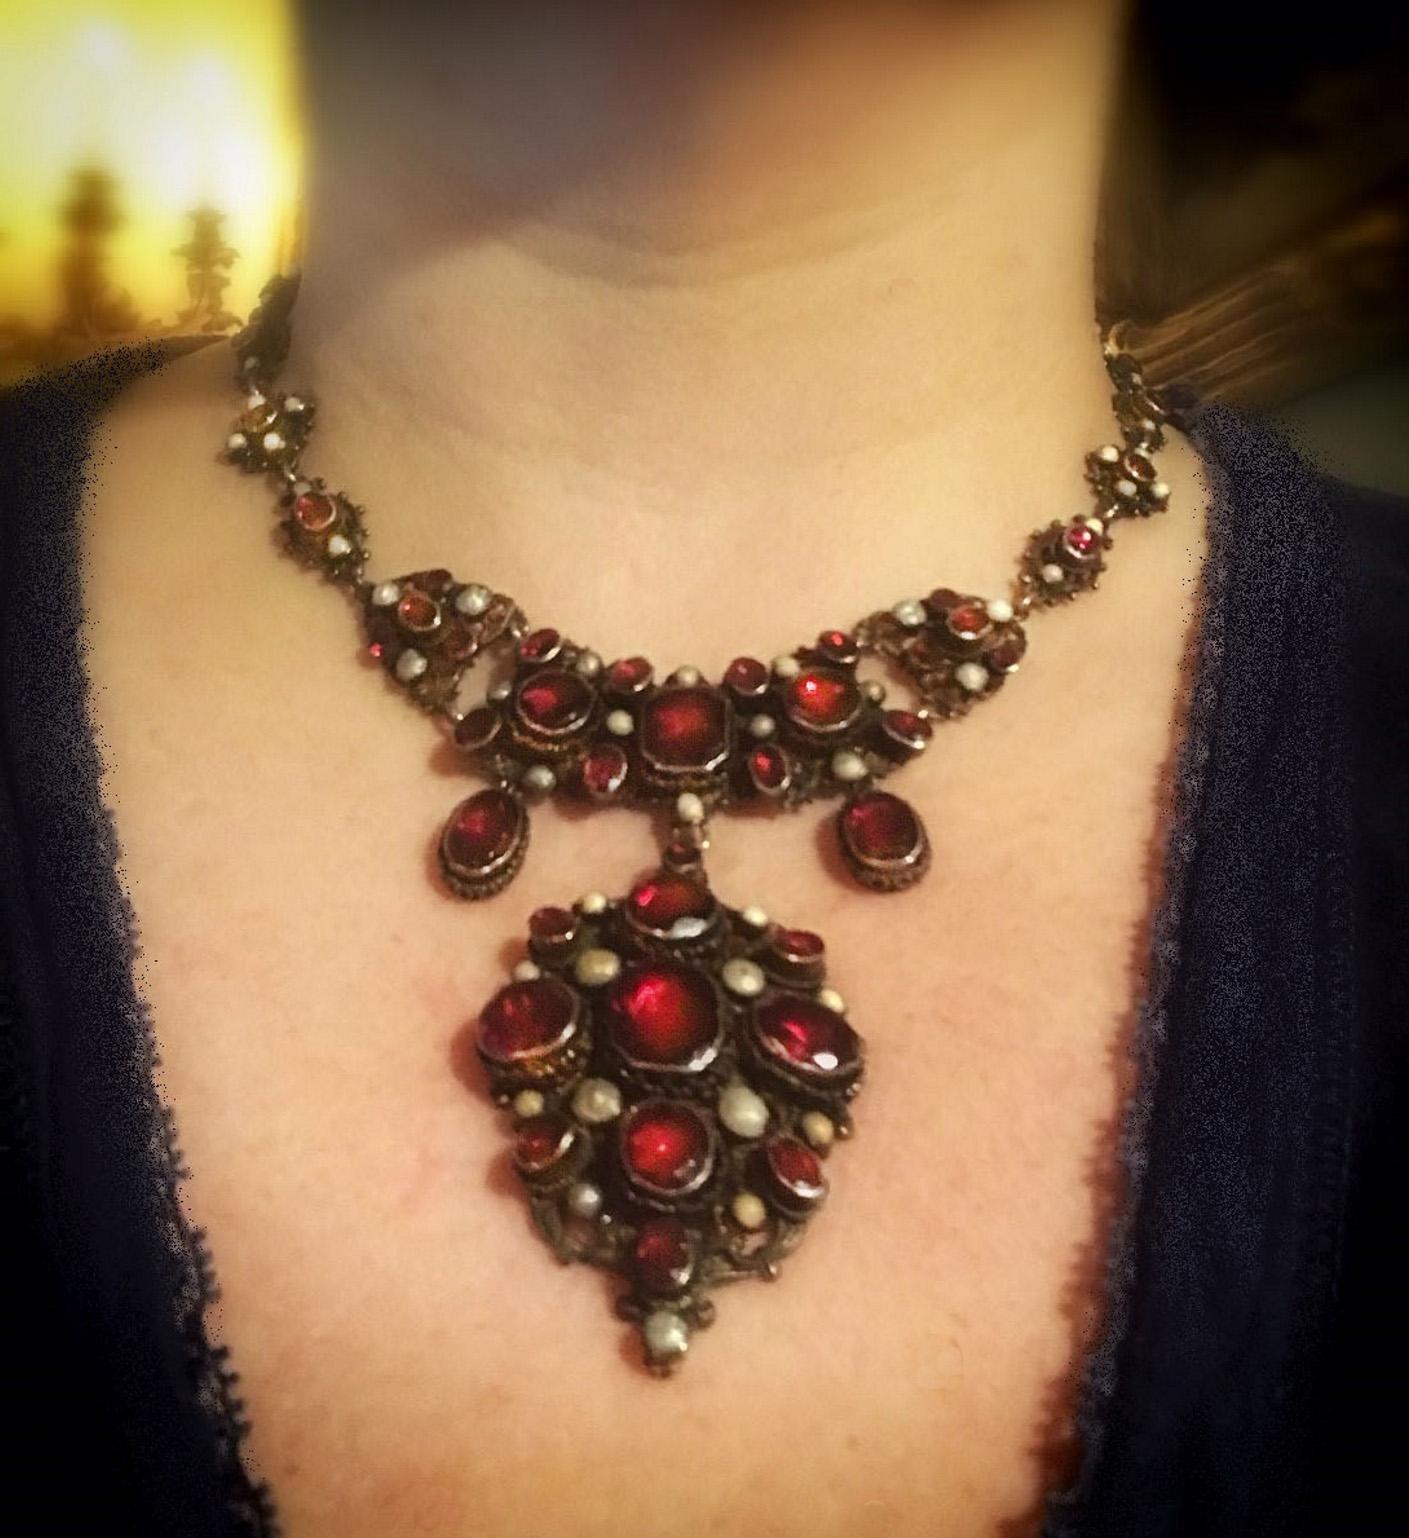 This regal necklace features 47 cut and polished deep red garnets. The entire bib is worked in silver gilt. Each linked piece is topped with a glowing bevel set garnet all the way around the neckline and several more garnets as it draws into the